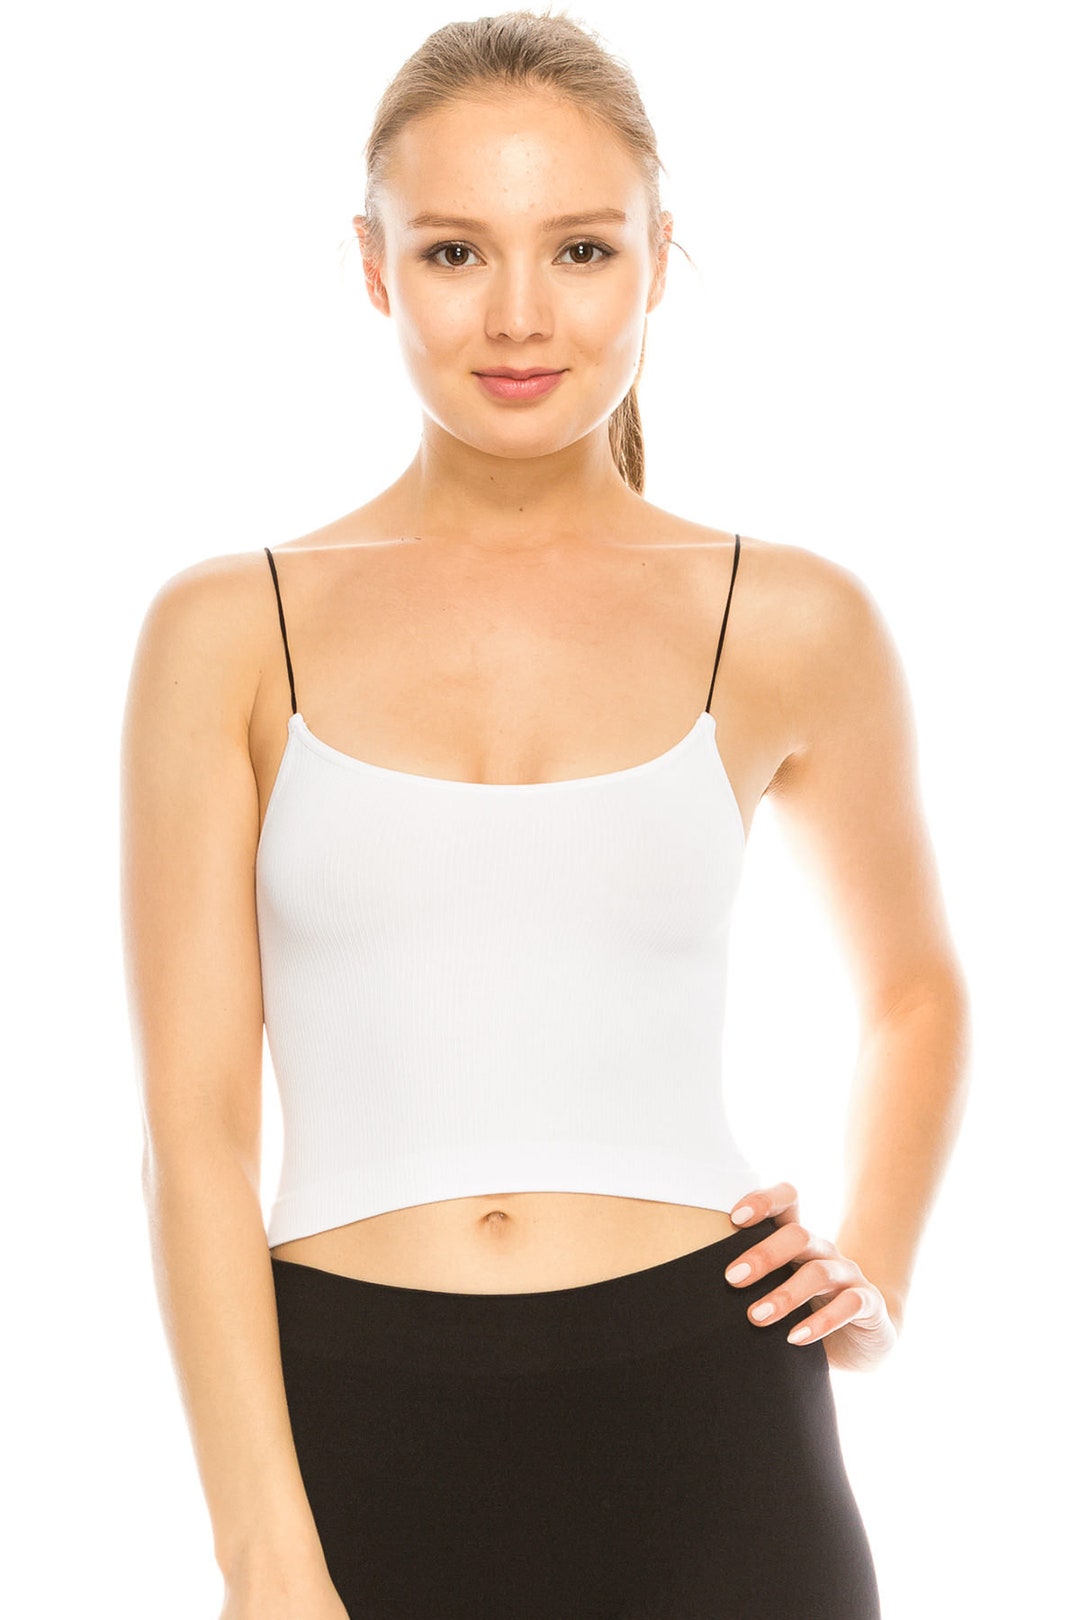 Kurve Women's Basic Strap Camisole - Seamless Y-Back Spaghetti Stretch Cami  Tank Top UV Protective Fabric Rated (Made in USA) at  Women's  Clothing store